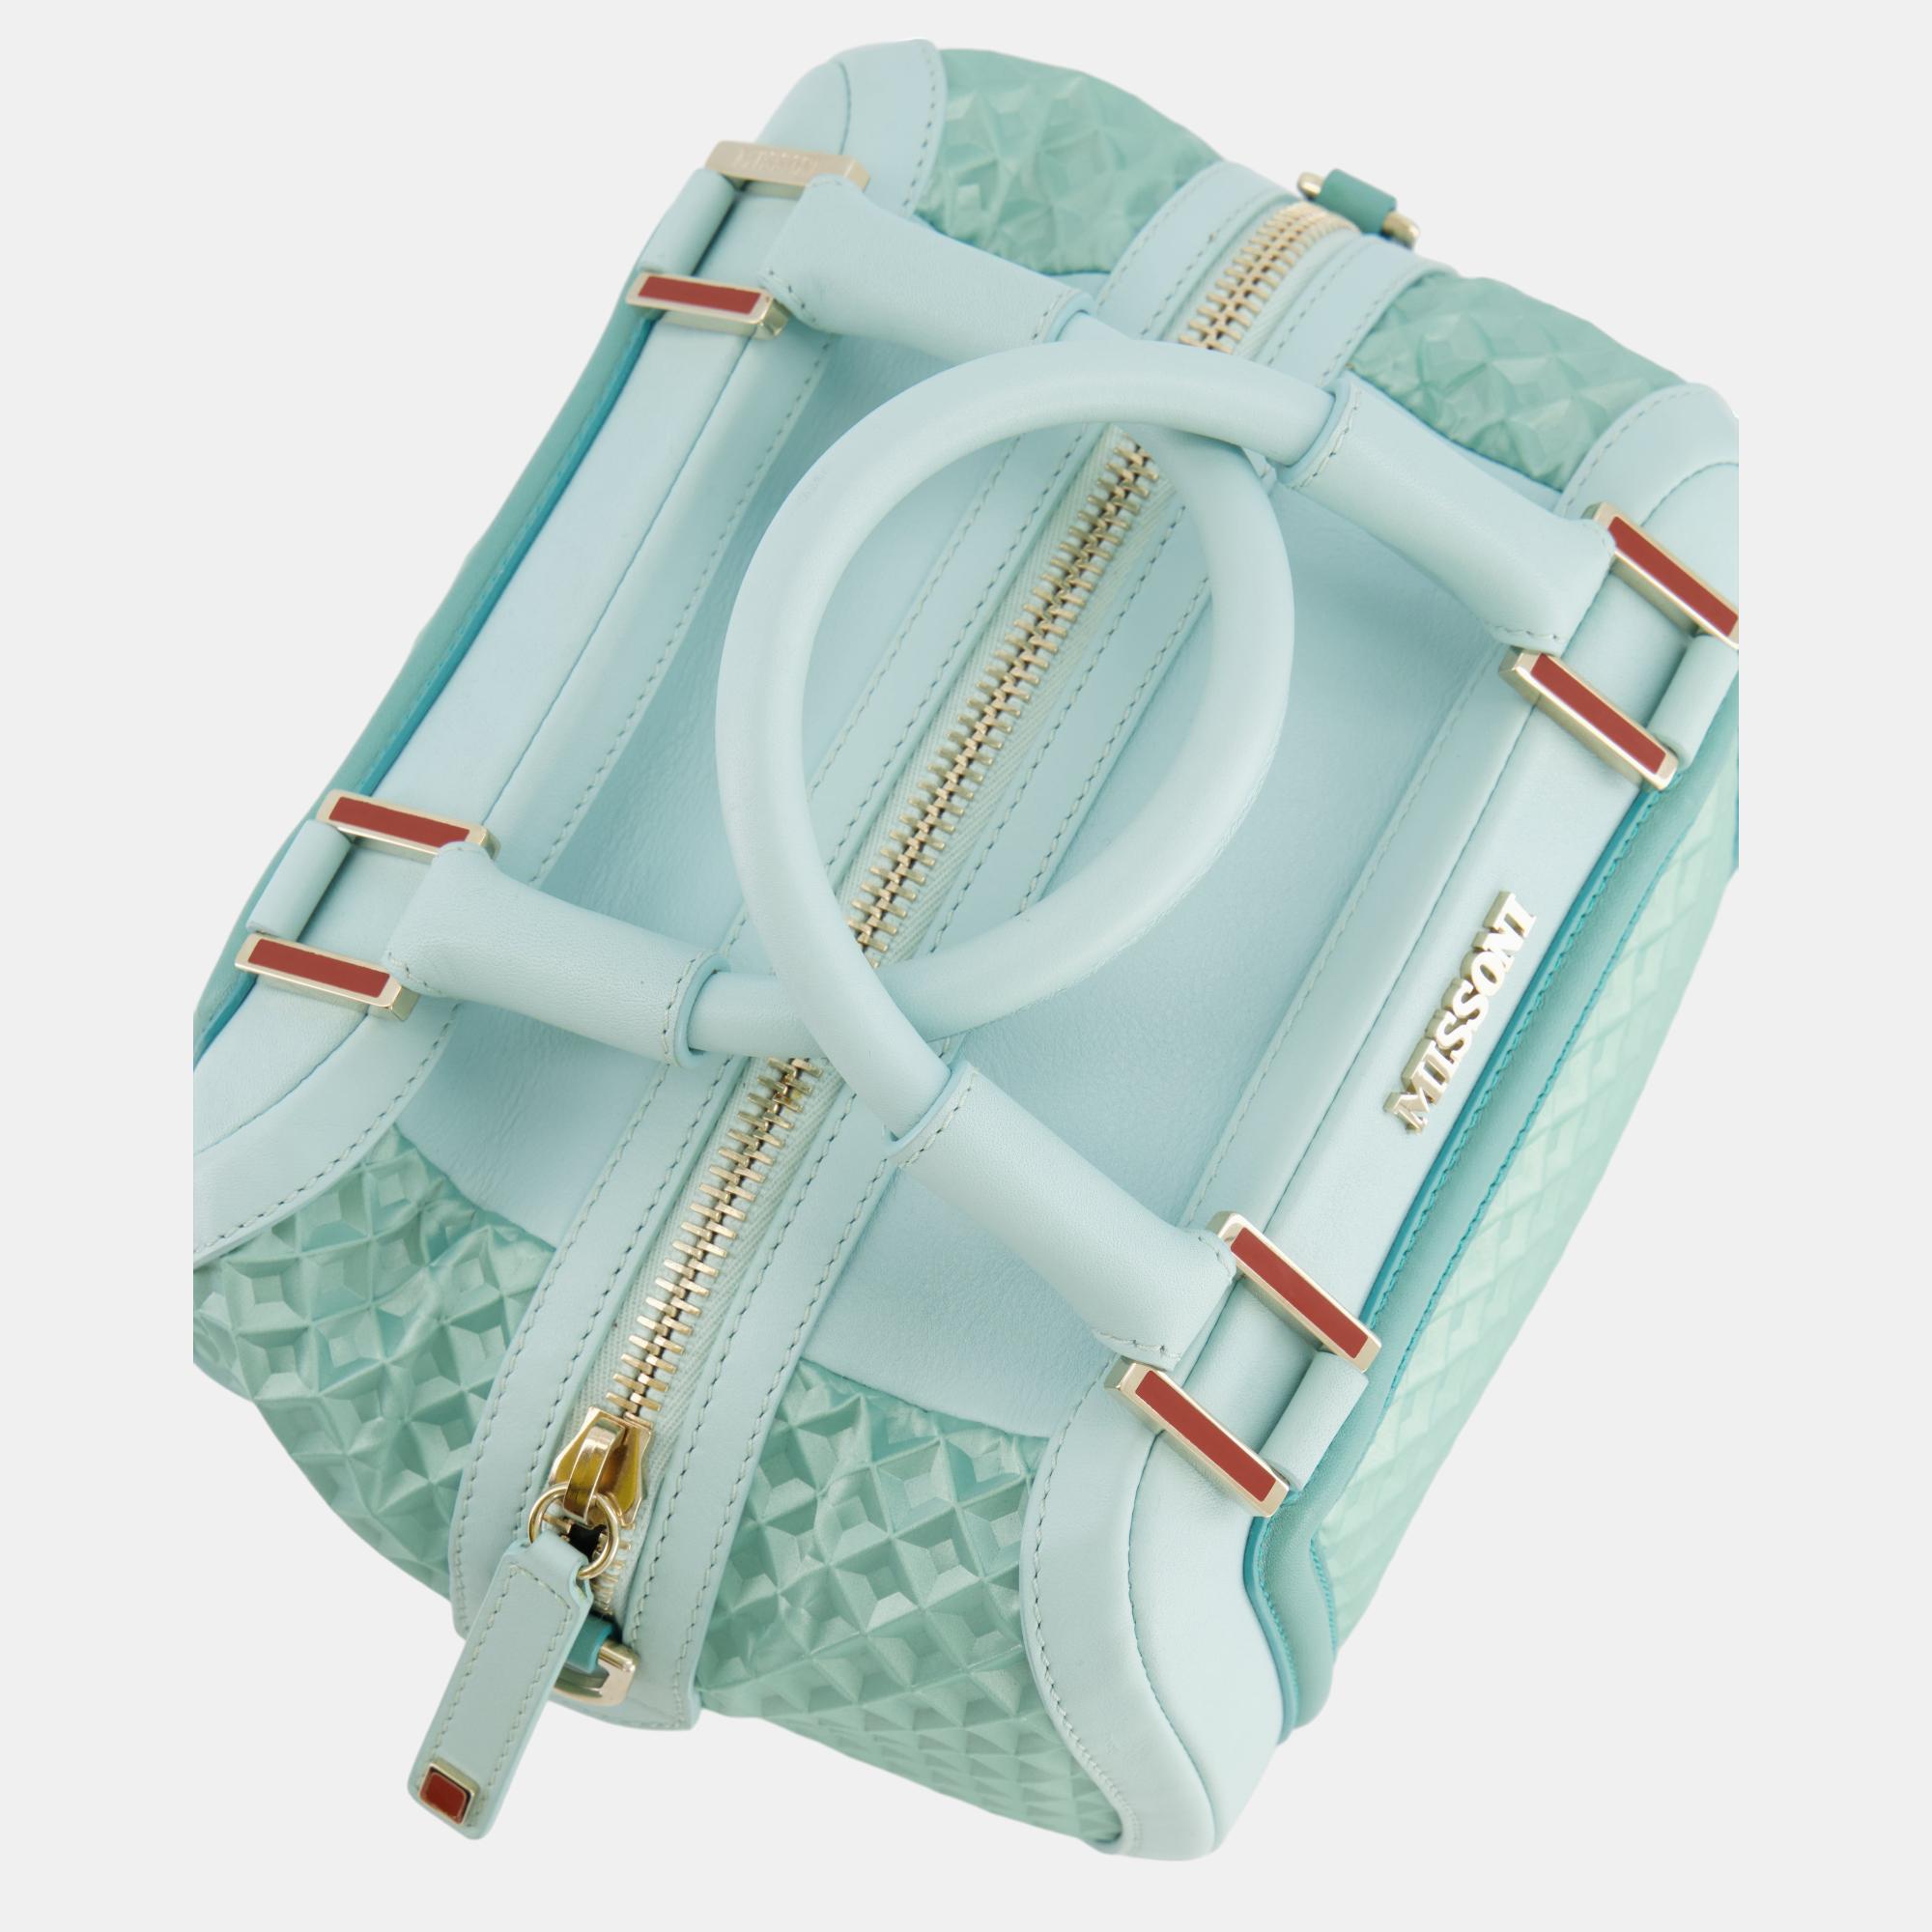 Missoni Turquoise Leather Top Handle Bag With Gold Hardware